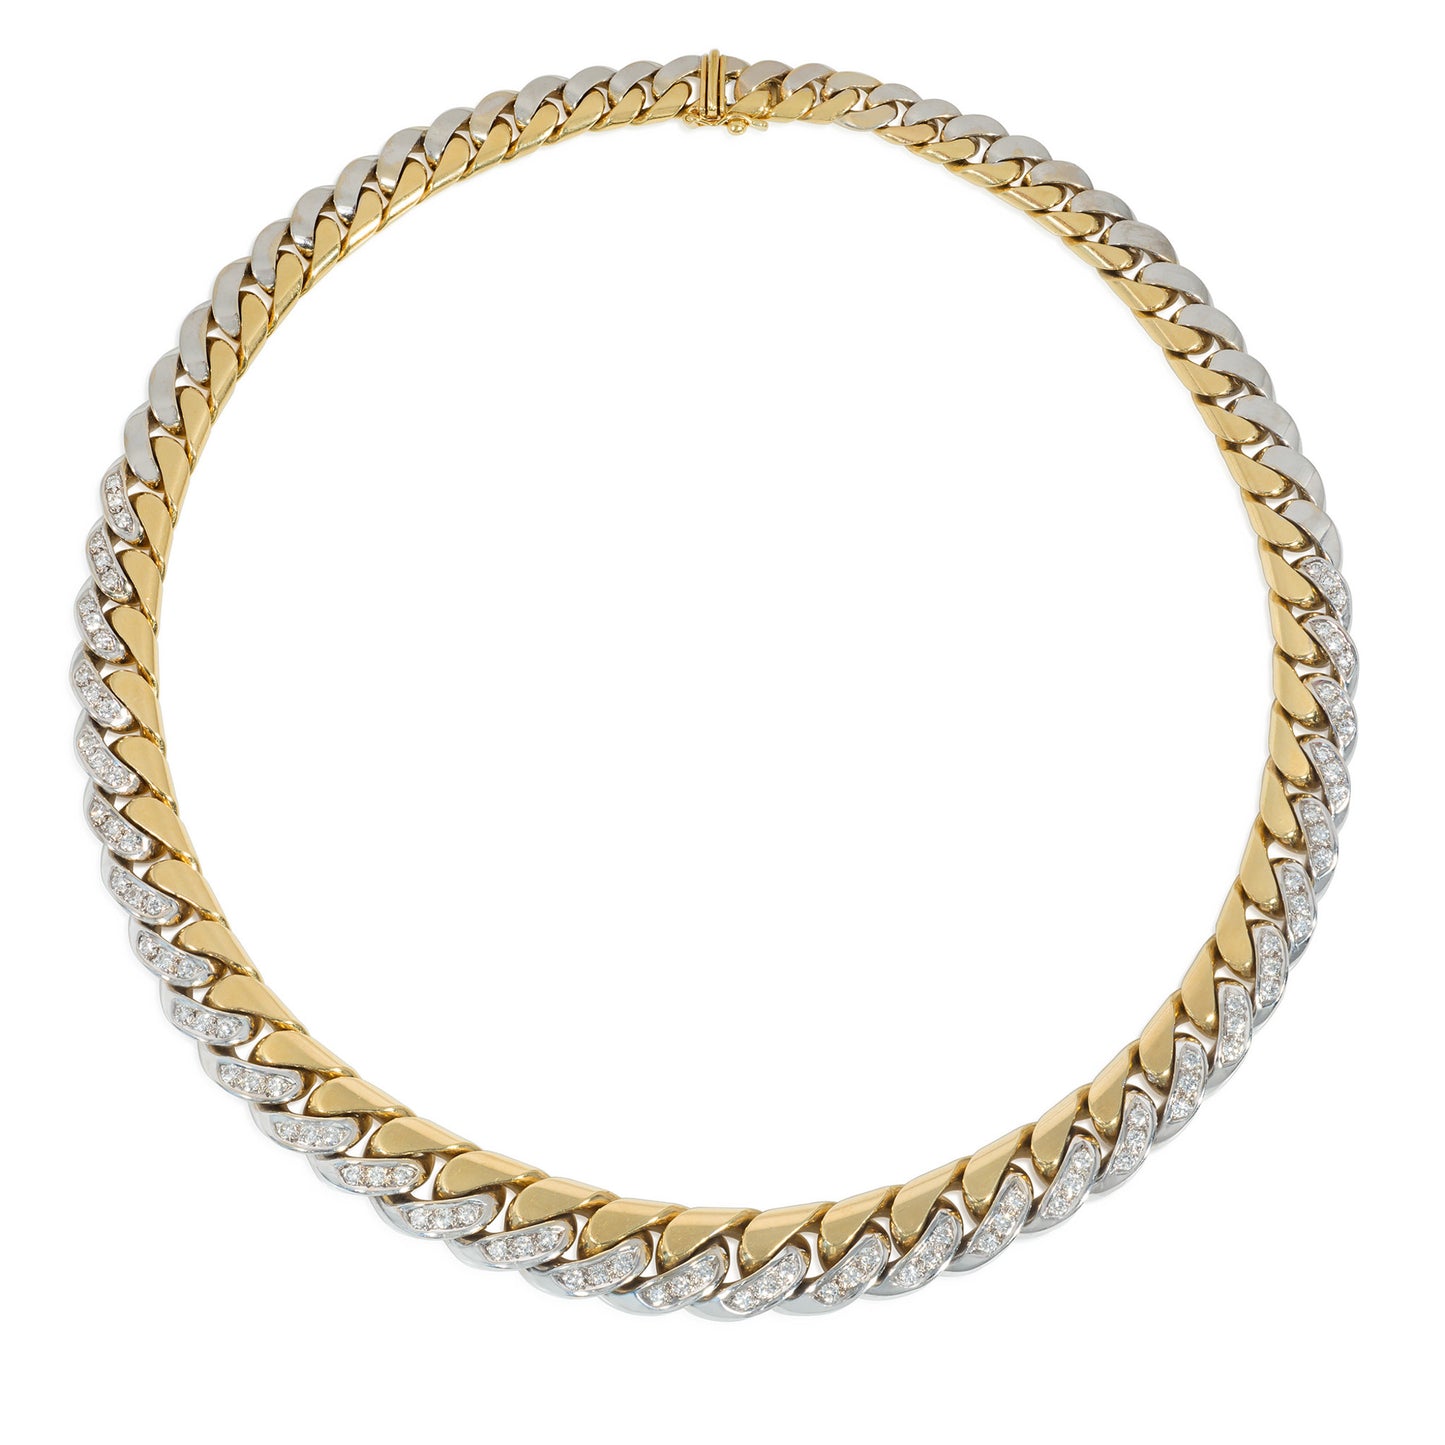 Bulgari Italy 1970s 18KT White & Yellow Gold Diamond Curblink Necklace front